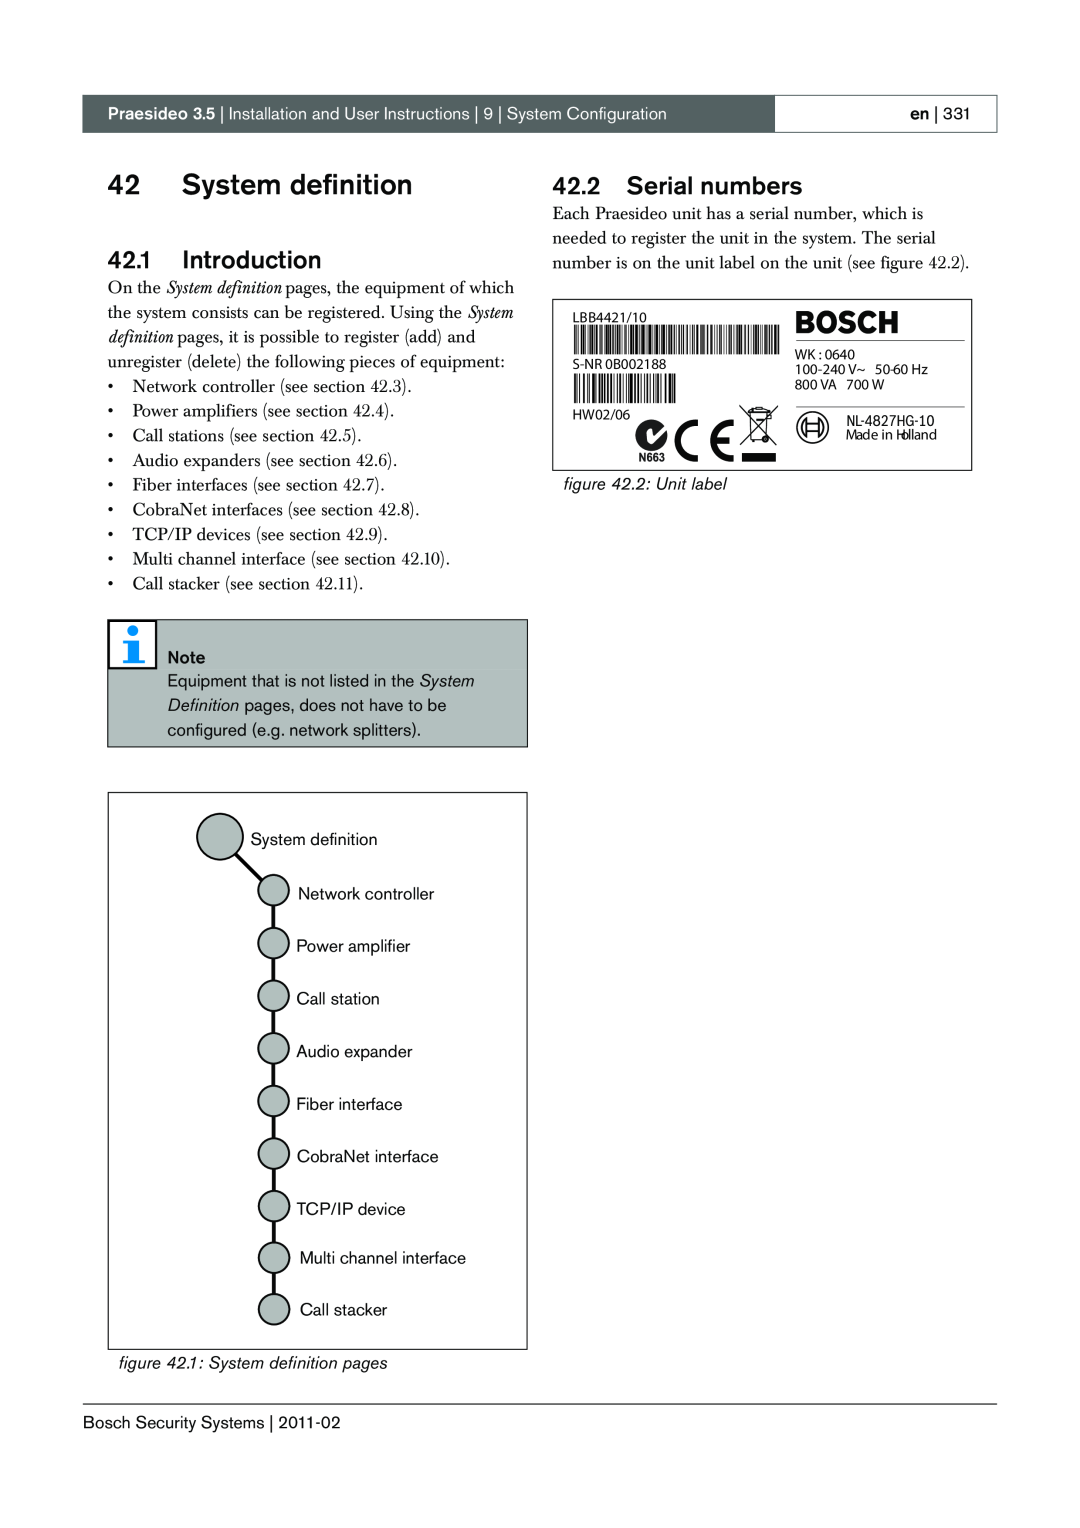 Bosch Appliances 3.5 manual 42.1Introduction, 42.2Serial numbers, 1: System definition pages, 2: Unit label 